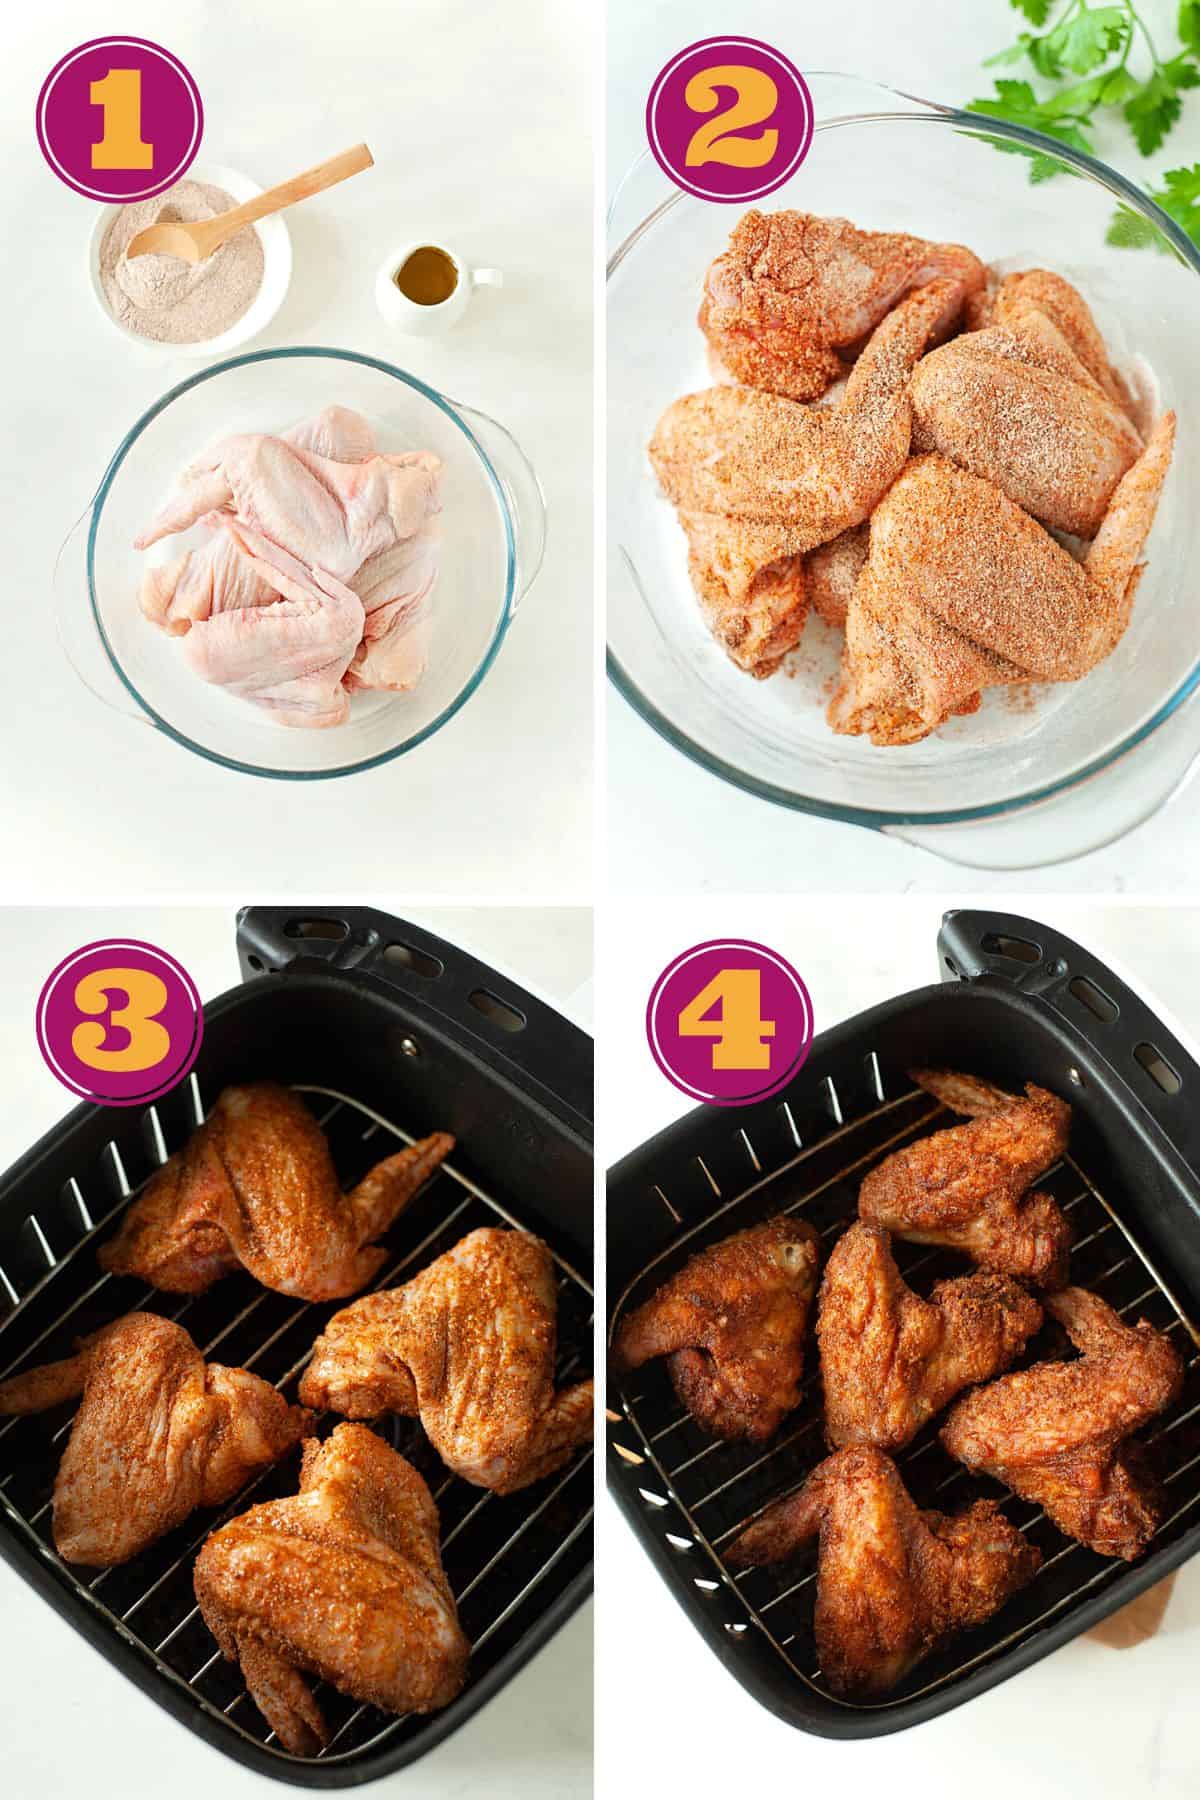 Four numbered pictures: first, a bowl with raw chicken wings, next to a bowl of spice rub and a a jug of olive oil; second, a bowl of raw chicken wings coated in spice rub; third, raw, seasoned chicken wings in the air fryer basket; and fourth, crispy chicken wings in an air fryer basket